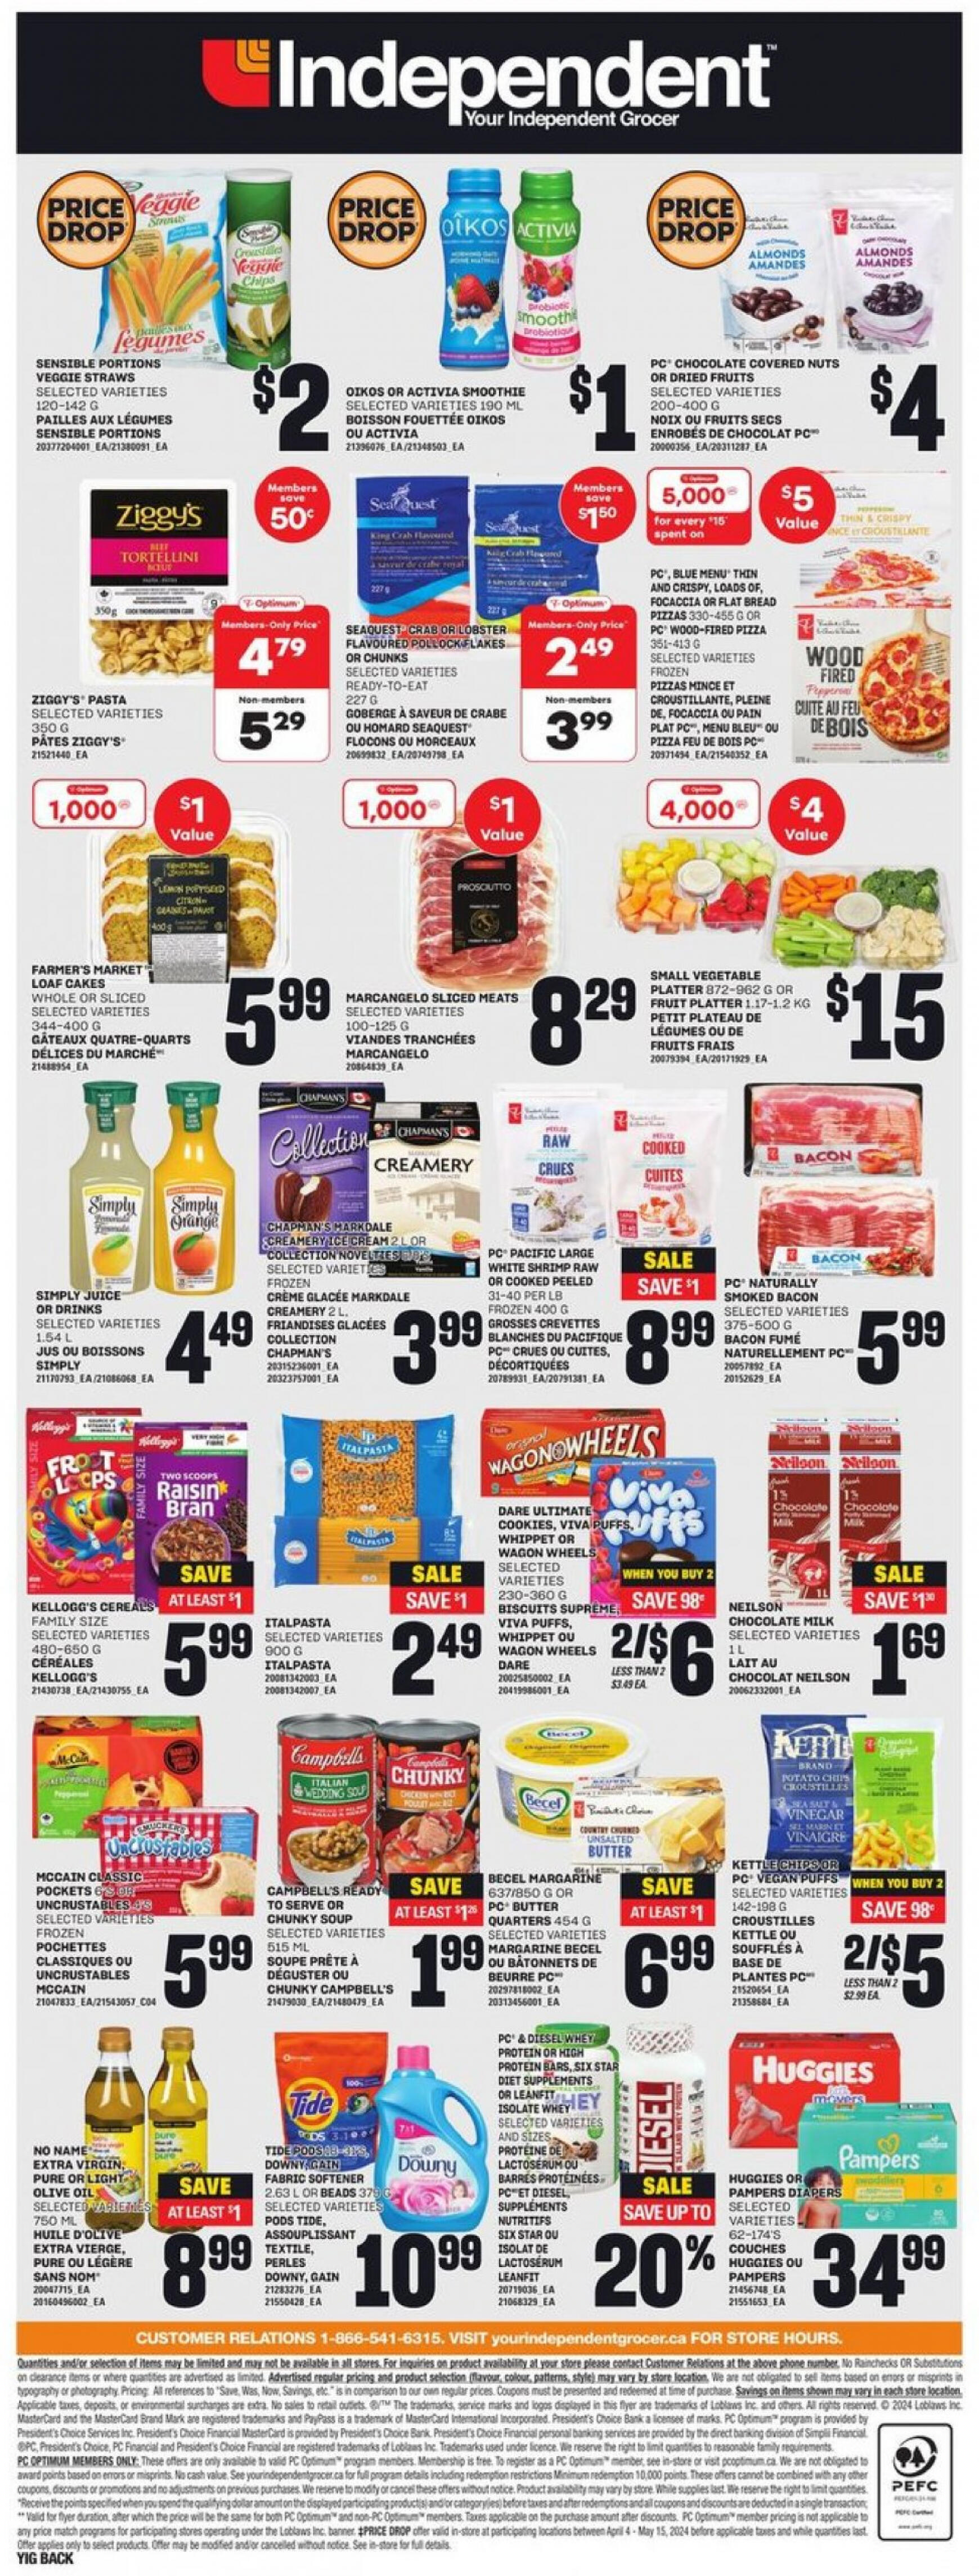 independent-grocery - Independent Grocery flyer current 18.04. - 24.04. - page: 6